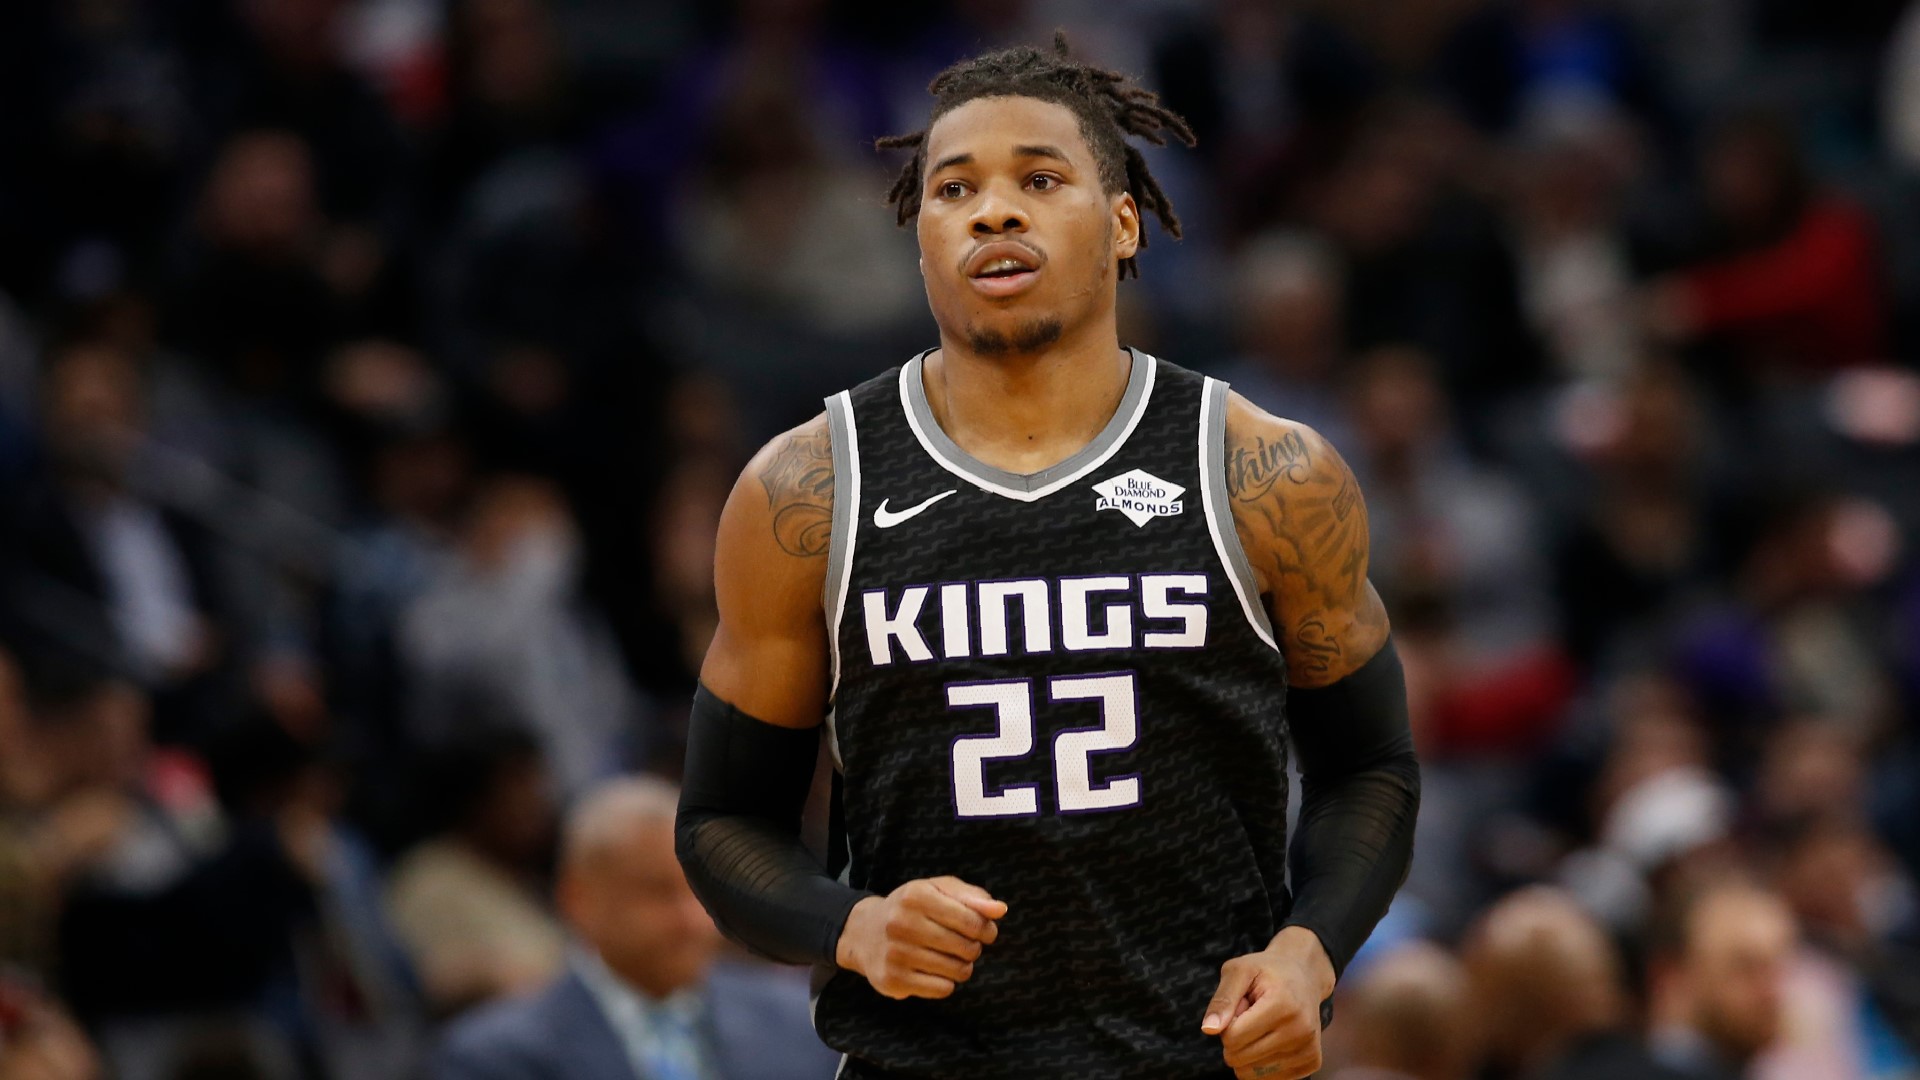 ABC10's Sean Cunningham catches up with Sacramento Kings F Richaun Holmes to talk about his quarantine experience and, along with his teammates, assist the community